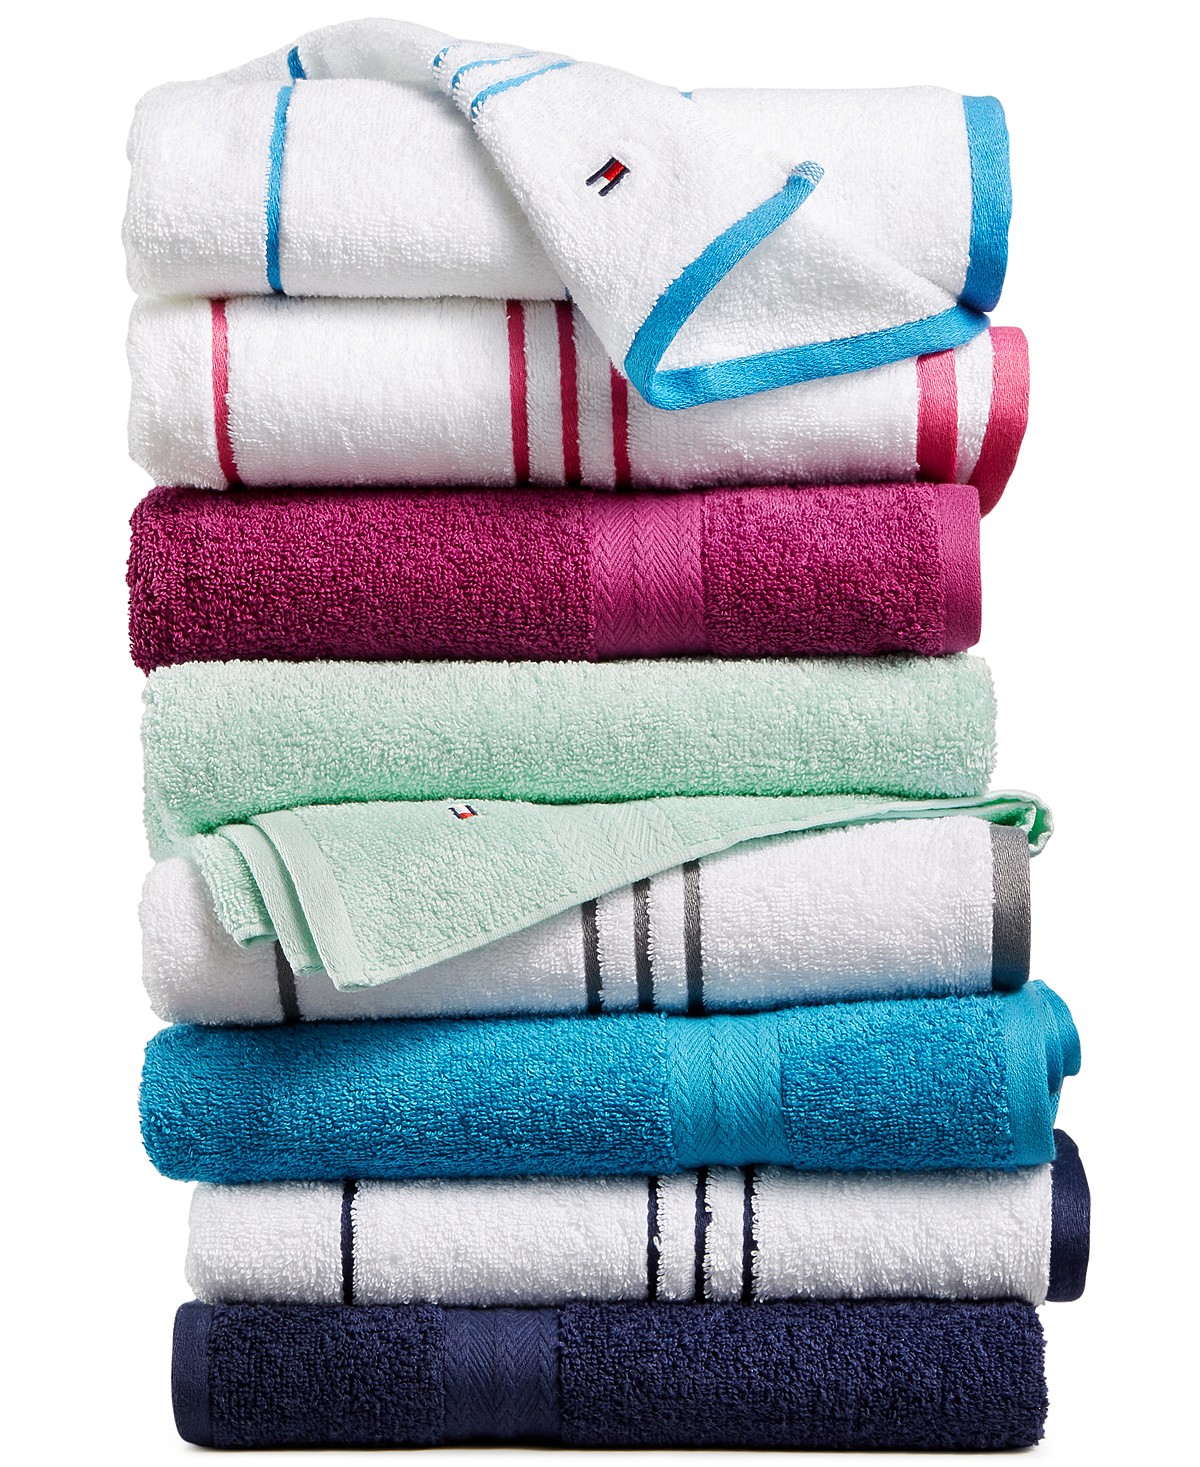 Macy&#39;s Has Tommy Hilfiger Towels As Low As $4 - DWYM